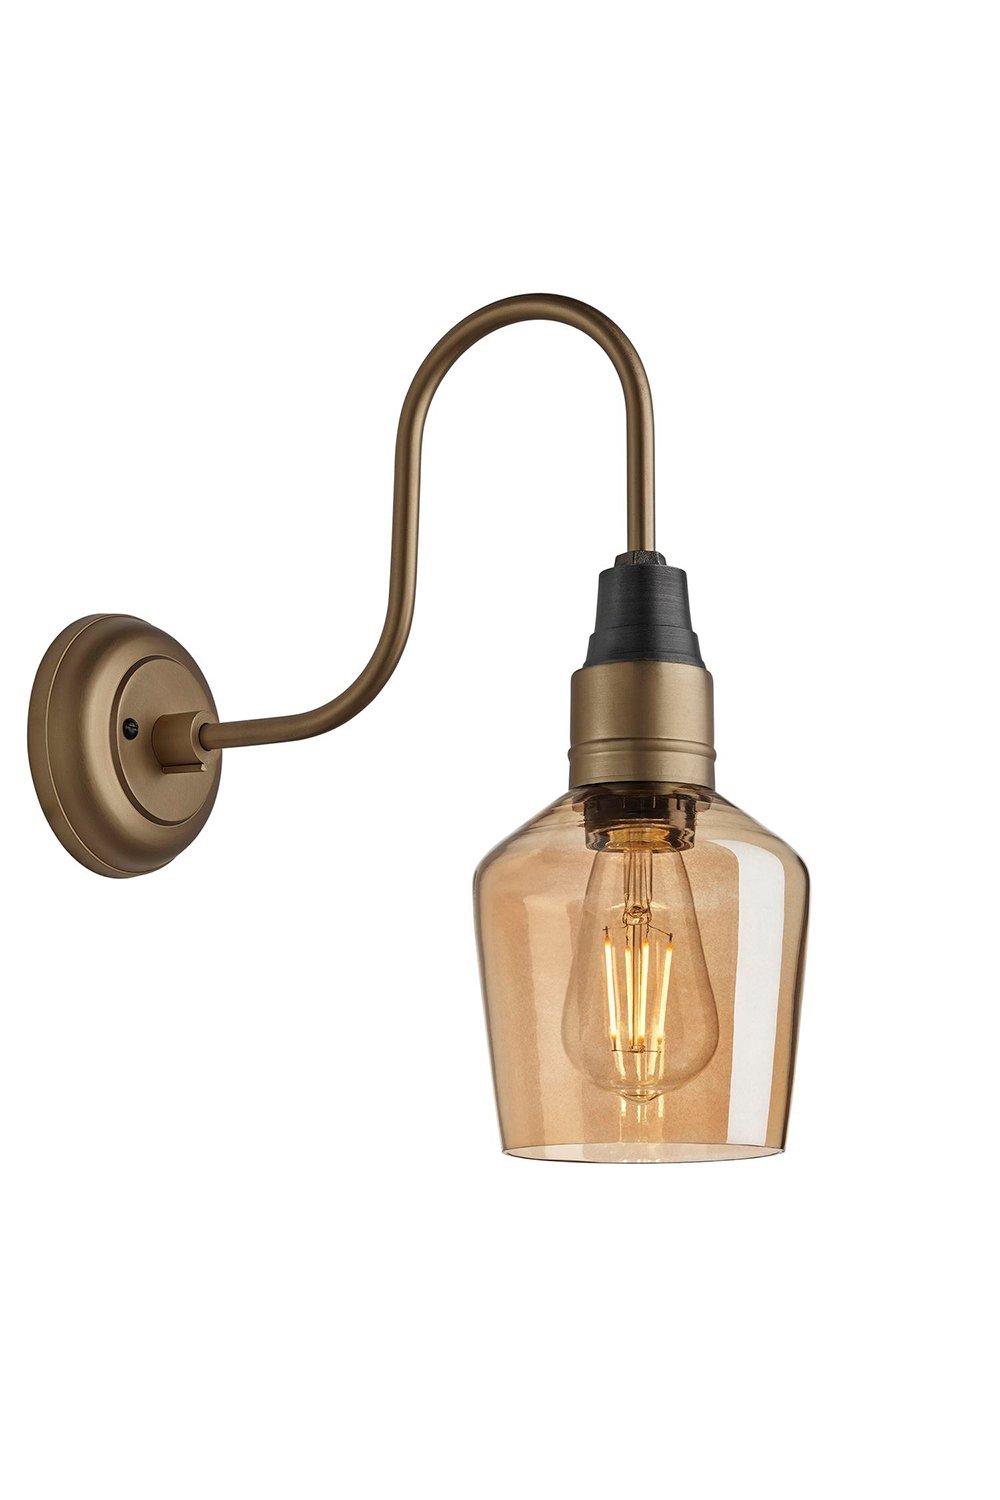 Swan Neck Tinted Glass Schoolhouse Wall Light, 5.5 Inch, Amber, Brass Holder